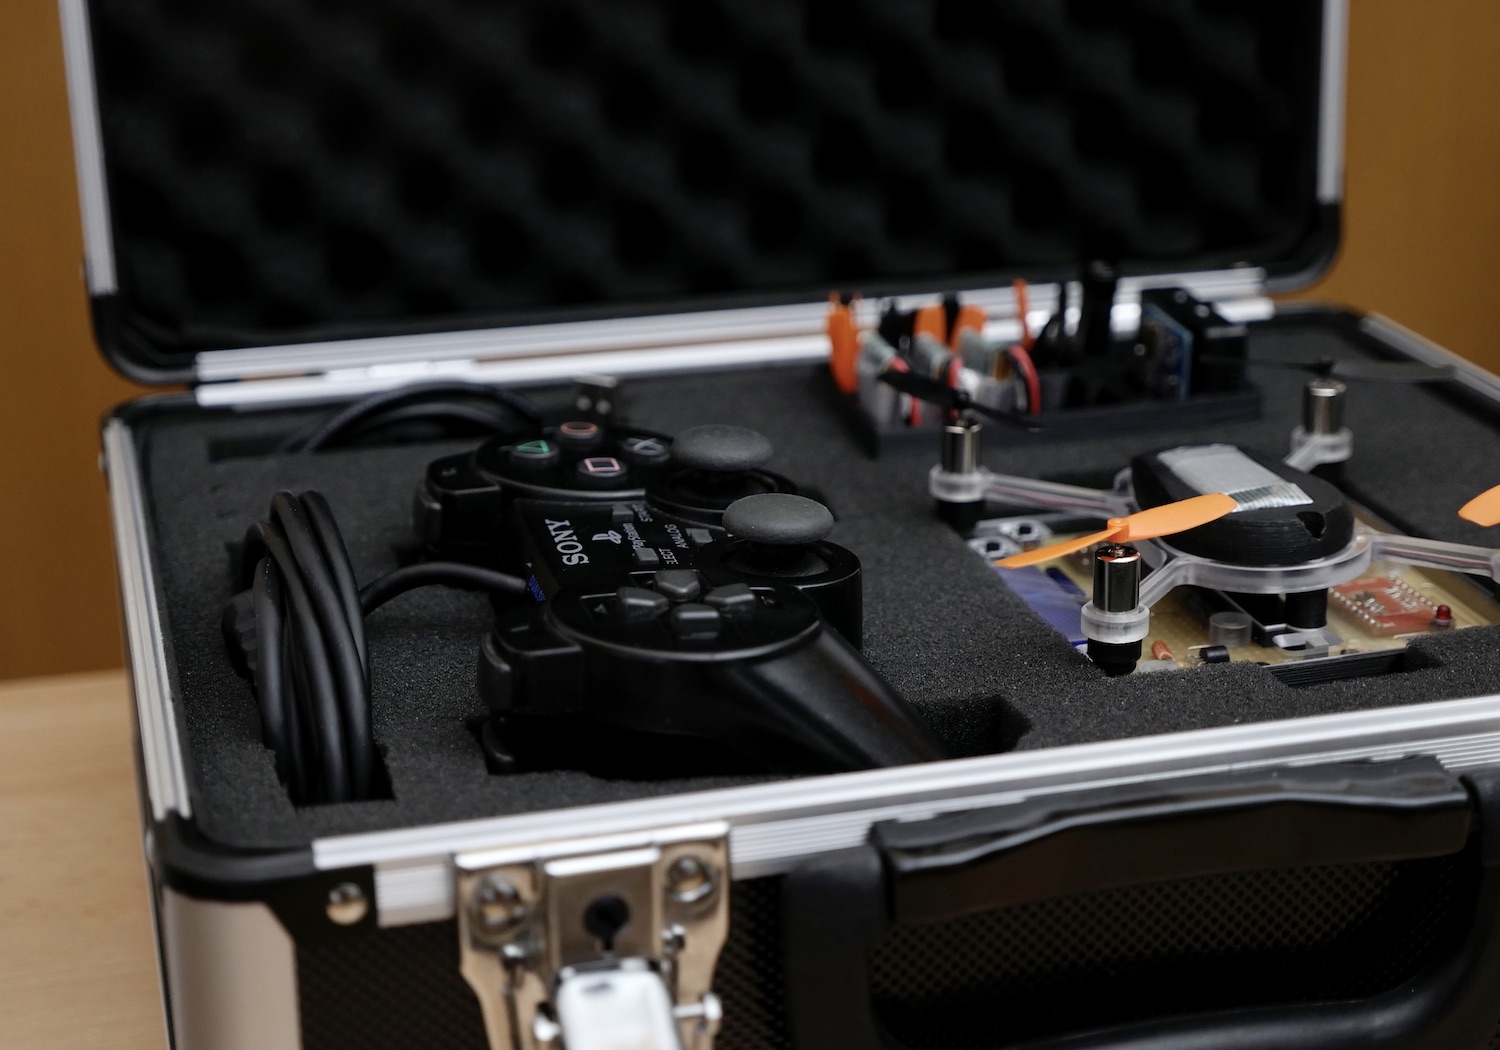 Controller, Picopter with base station, spare parts are all neatly fitted into a custom case.